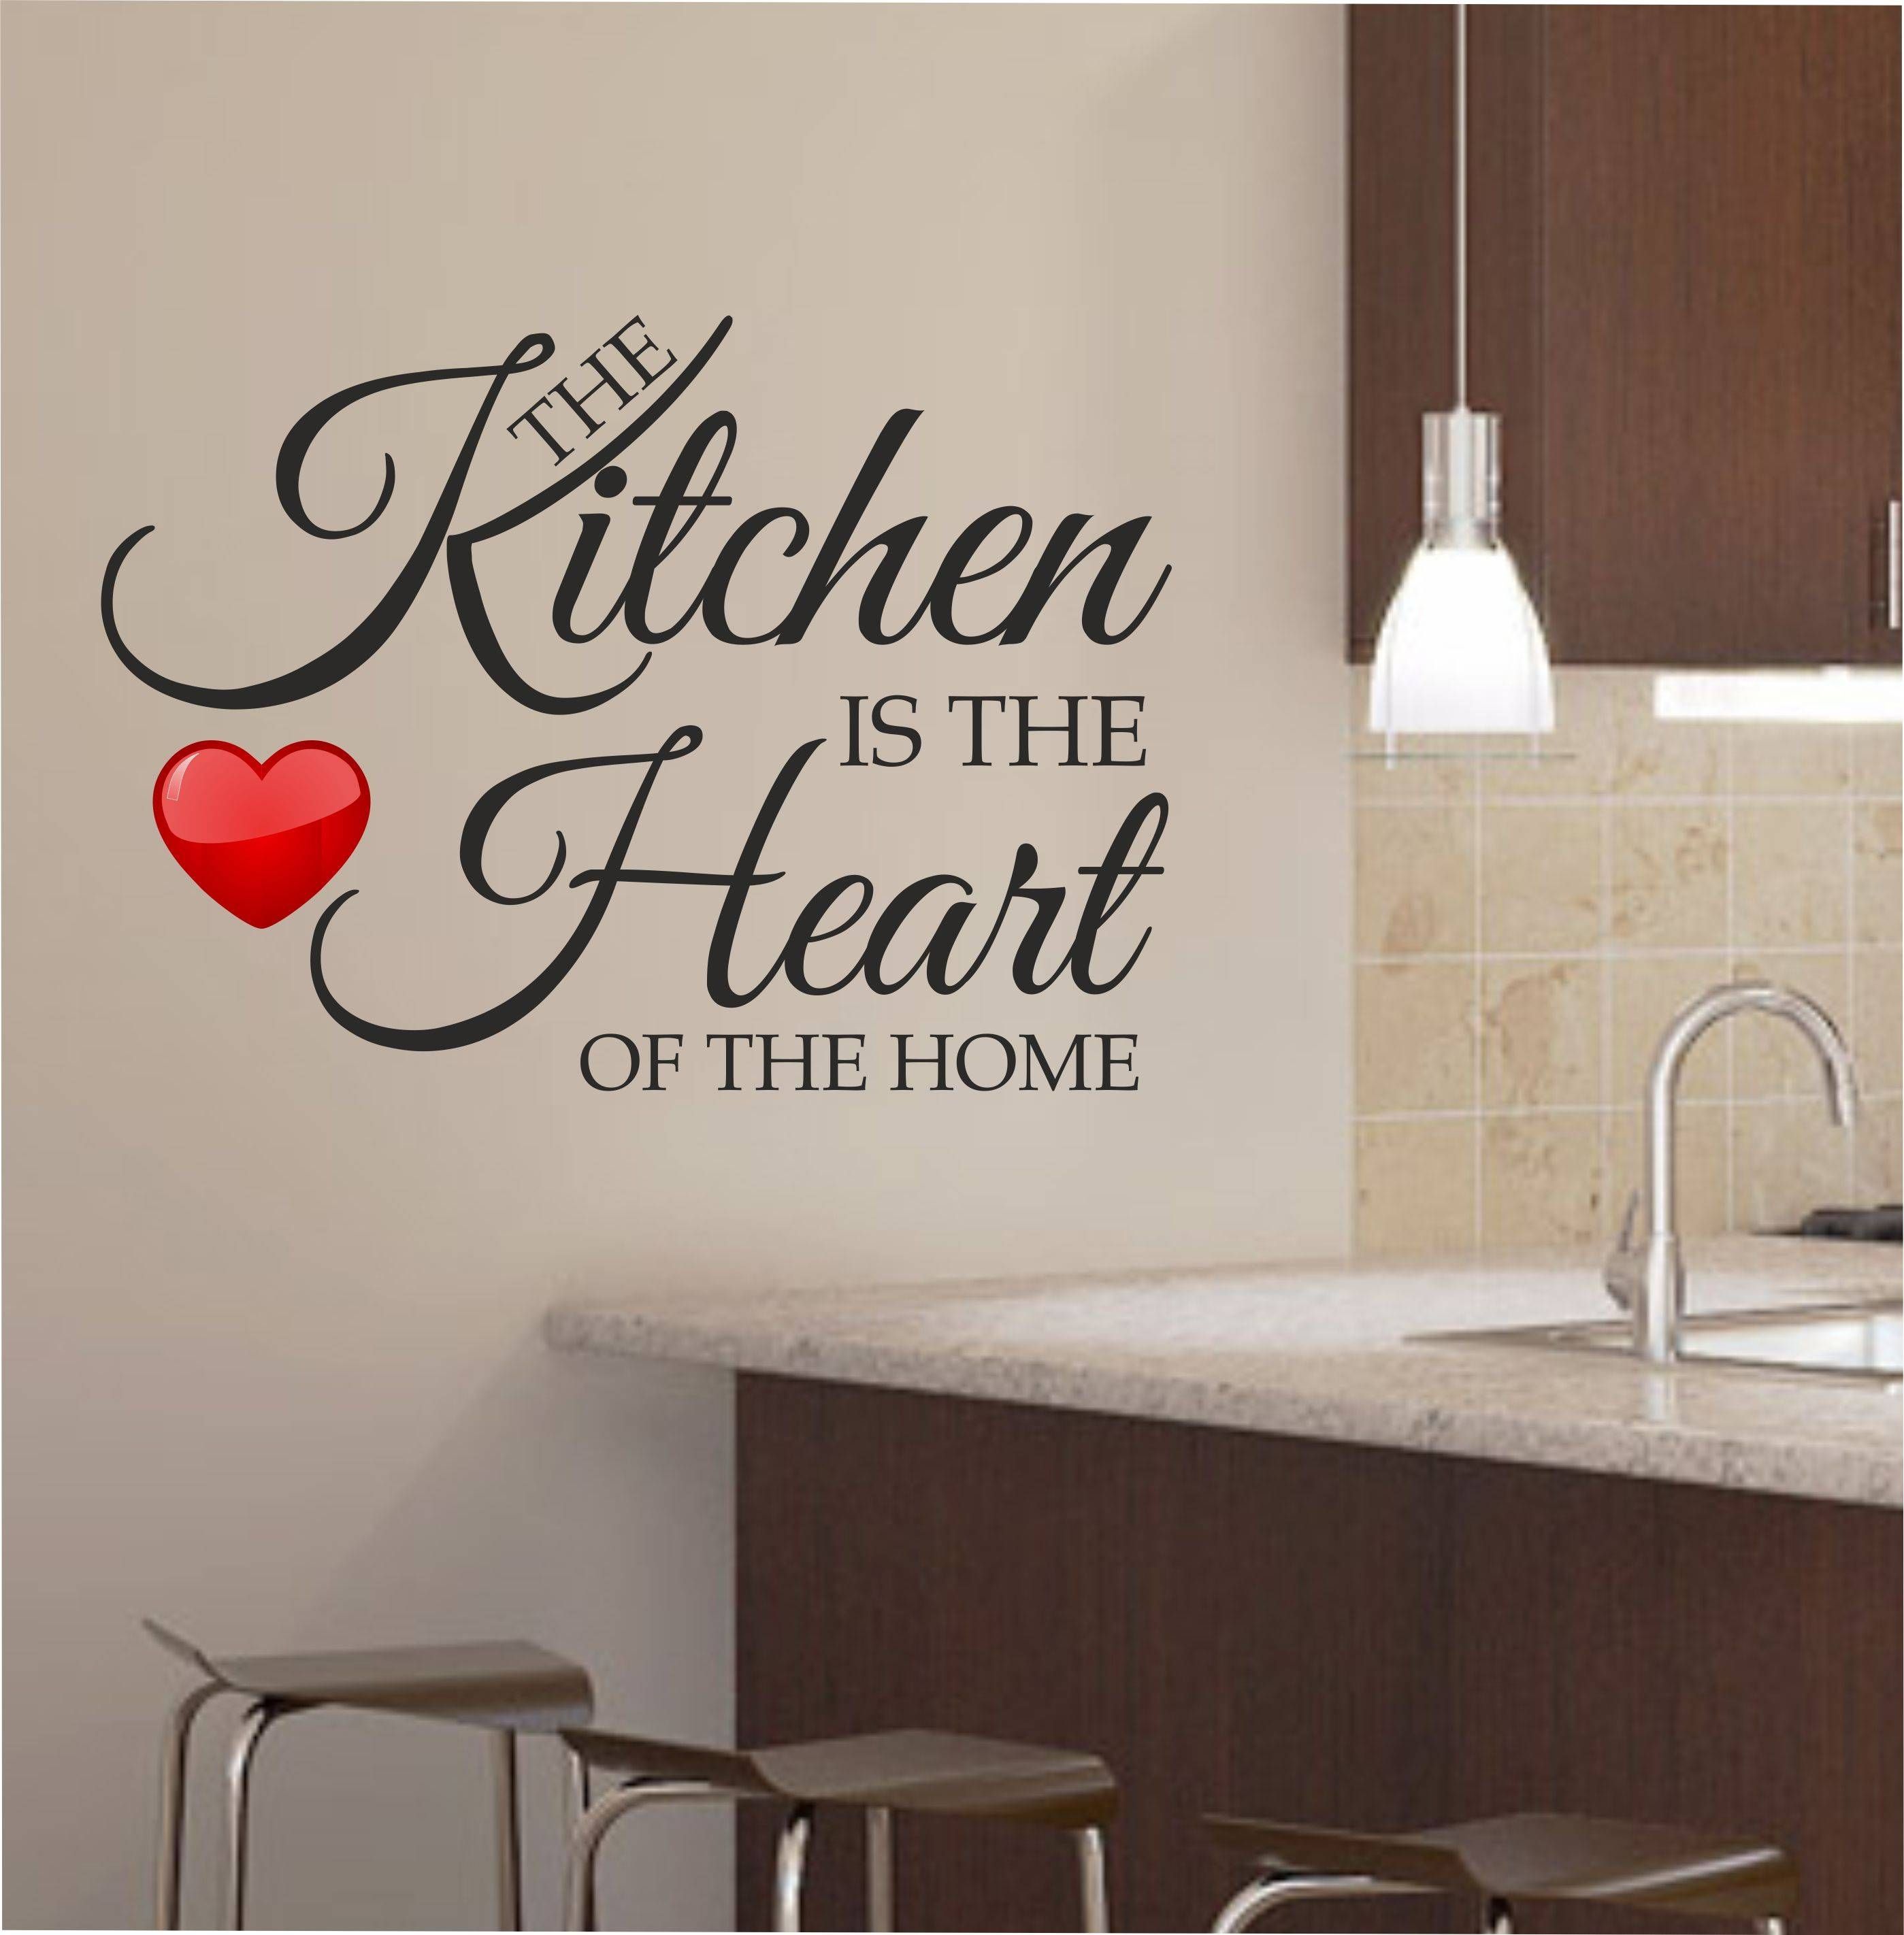 Decorate Your Kitchen With Appealing Kitchen Wall Art – Designinyou Throughout Most Current Wall Art For Kitchens (View 1 of 20)